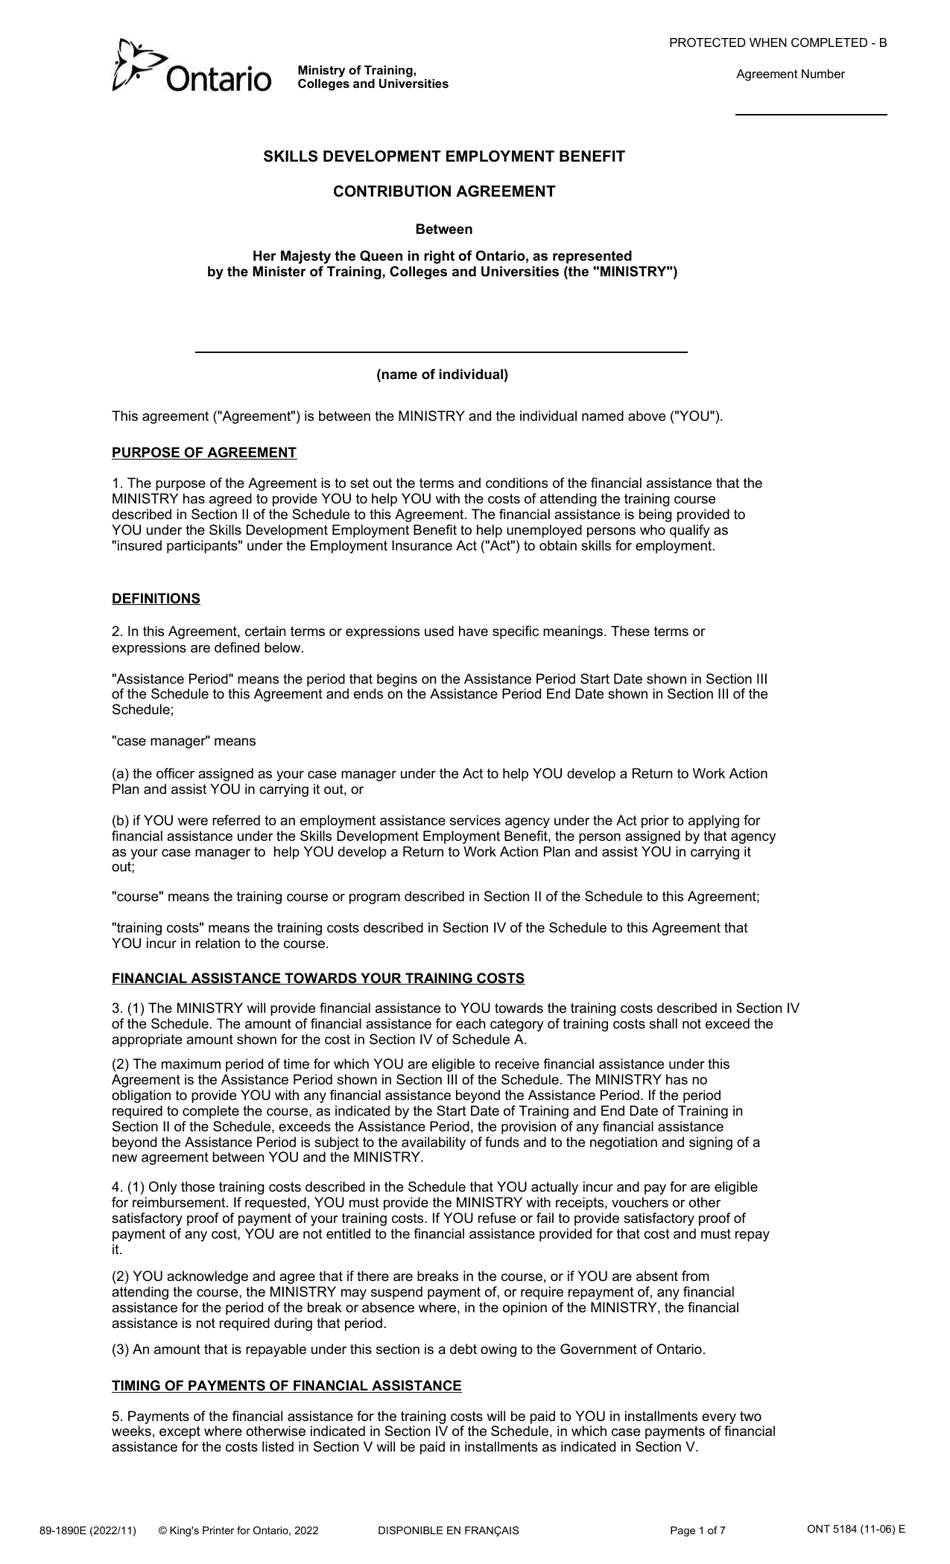 Form 89-1890E Skills Development Employment Benefit Contribution Agreement - Ontario, Canada, Page 1